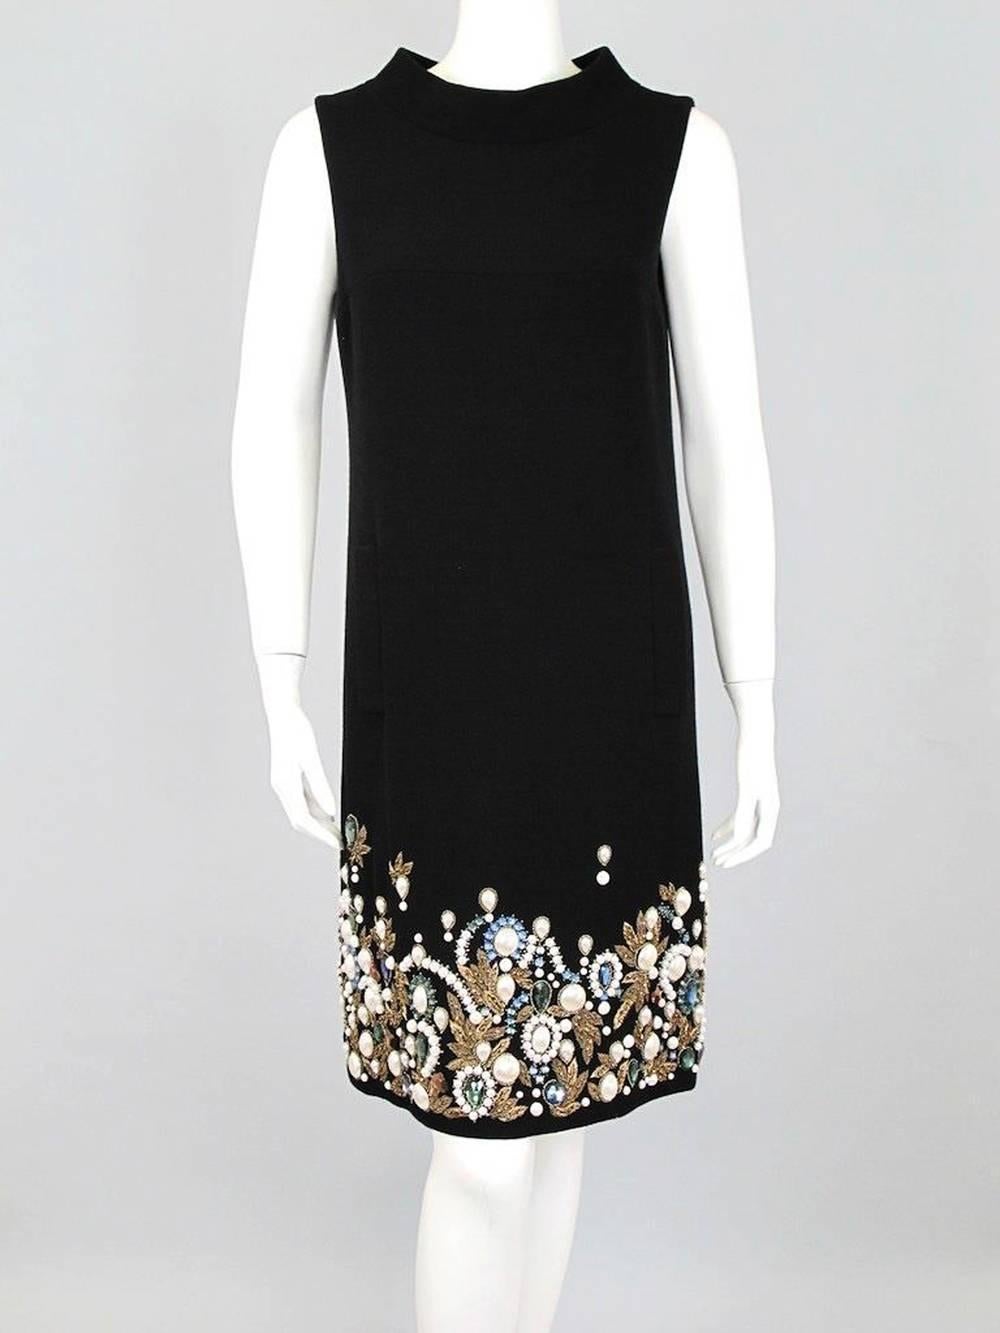 Oscar de la Renta Black Cocktail Dress
Designer Size - 6 
100% Wool - Heavy-weight, wool crepe fabric.
Intricate Gold Leaf, Pearl, and Gem Embroidery at hem.
Wide funnel neck, Sleeveless, Front Vertical Pockets, Back Zip Closure, Silk